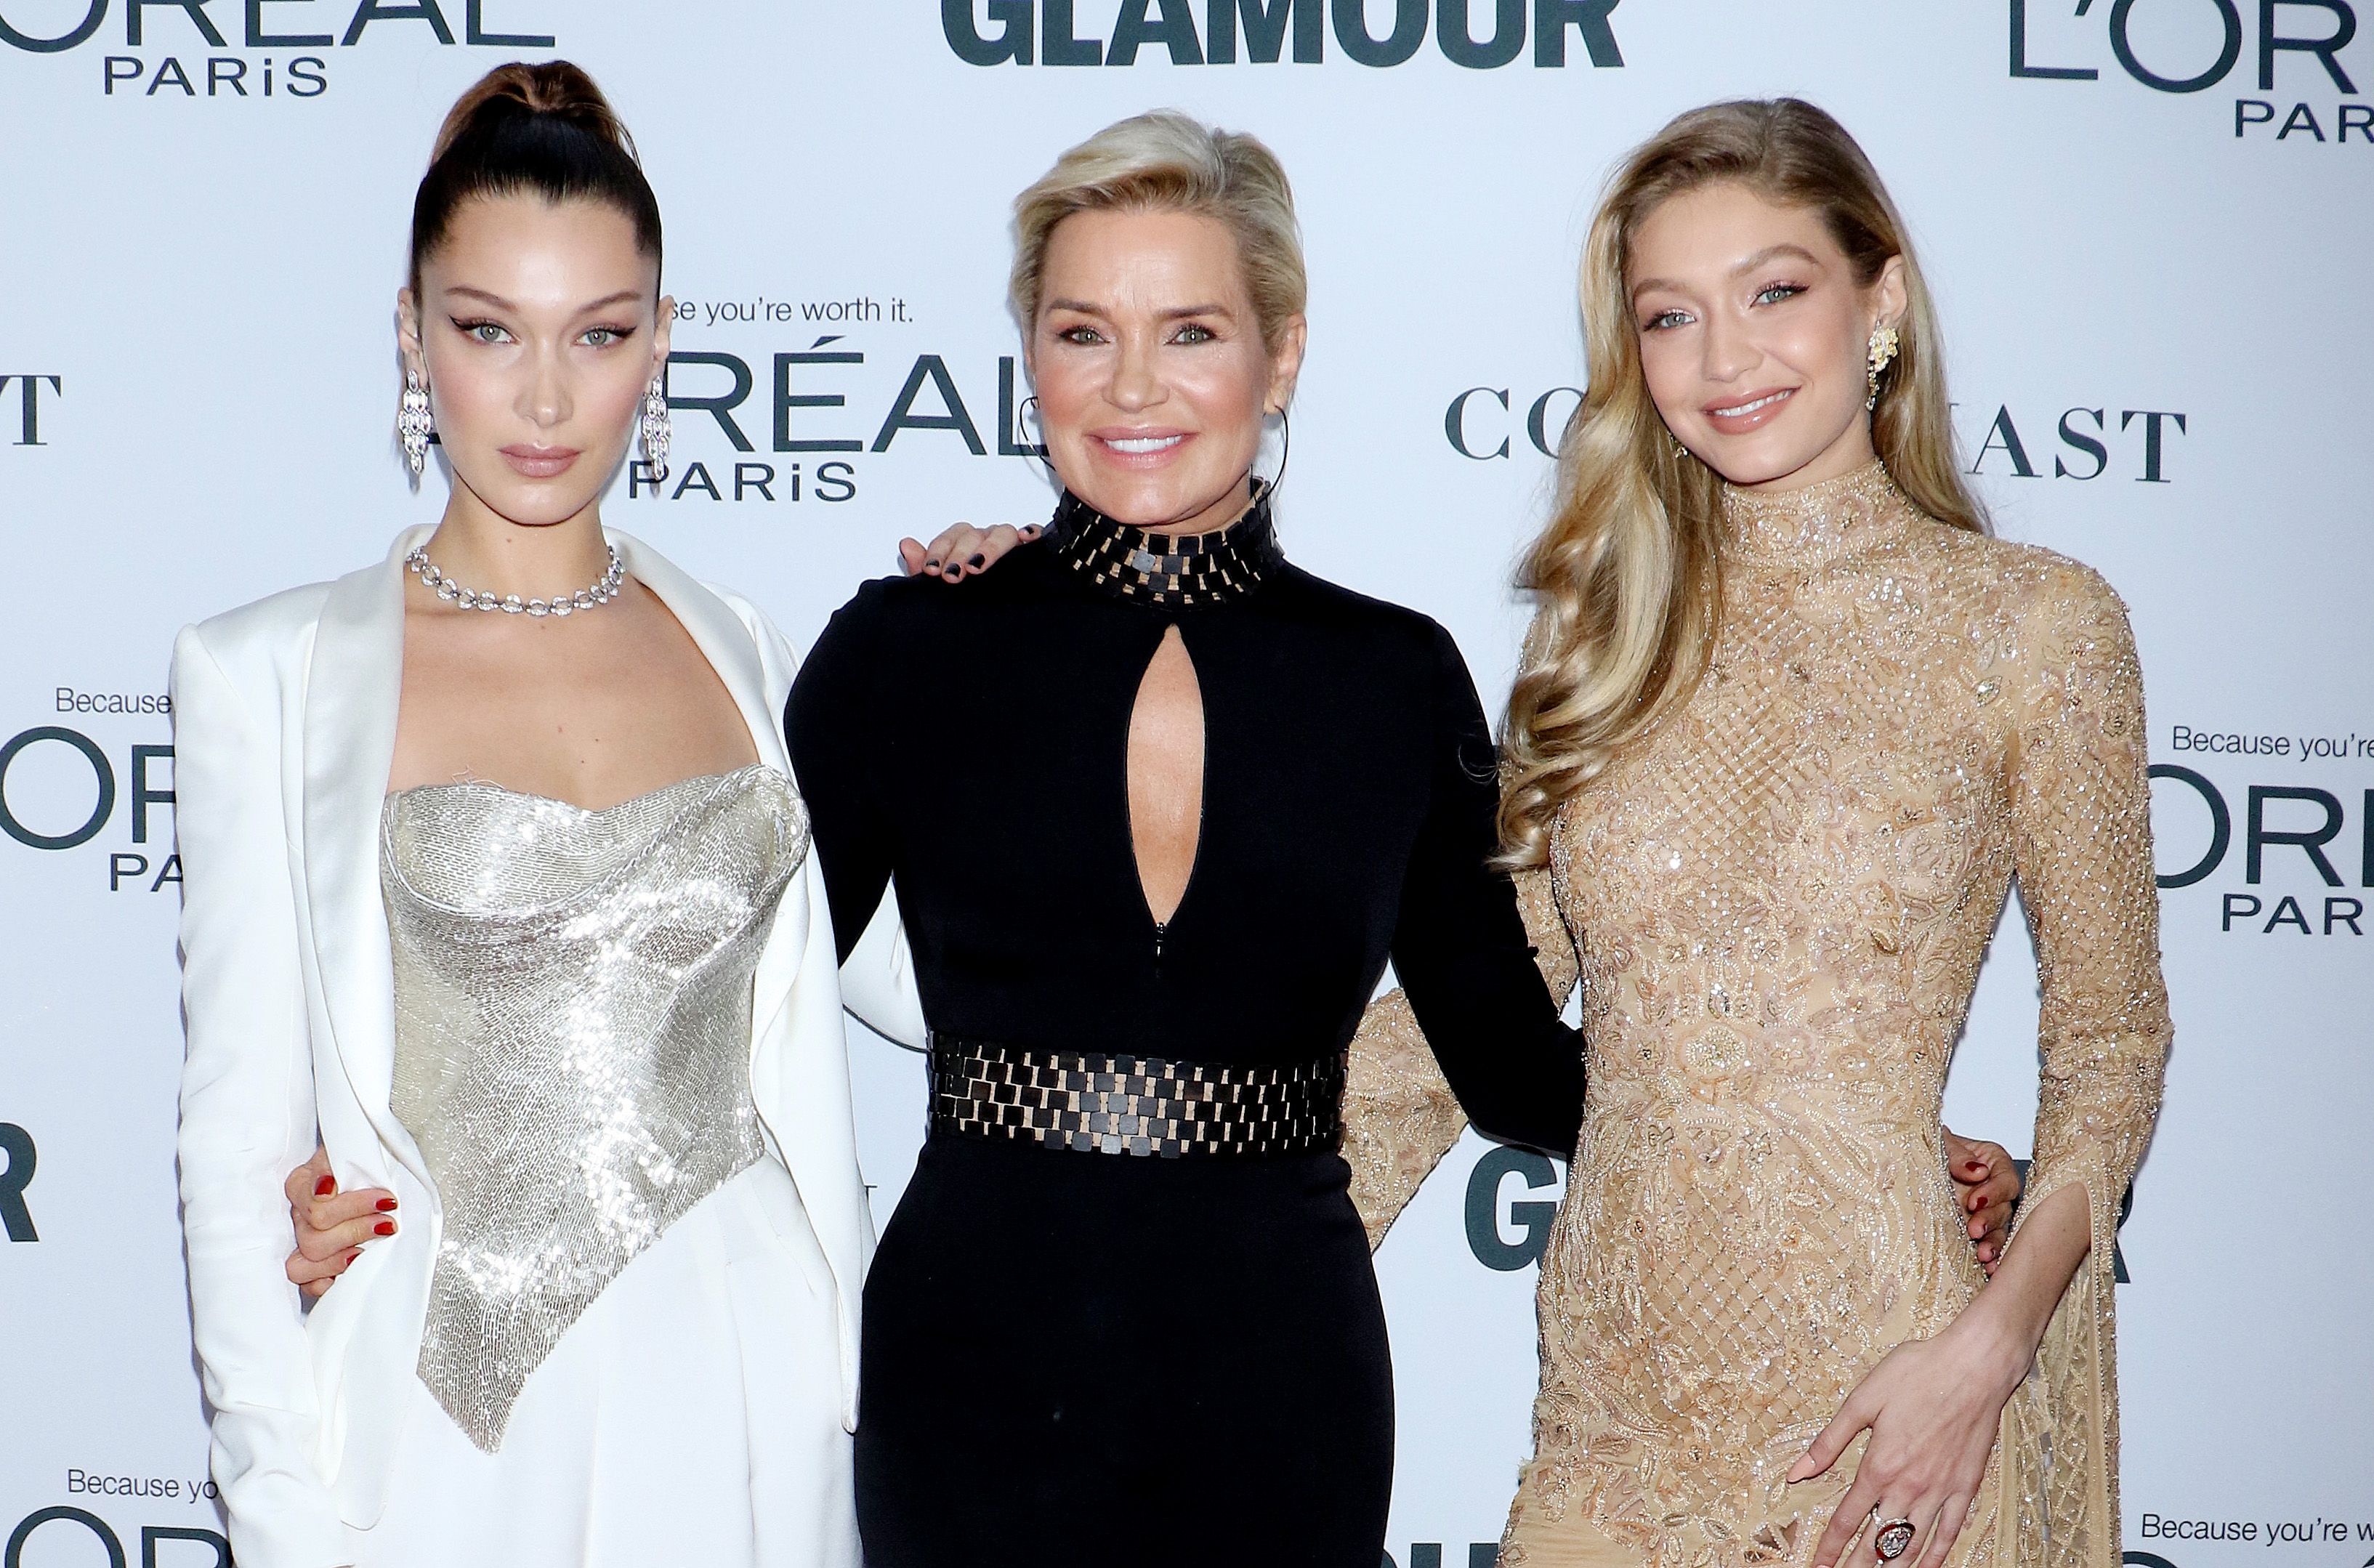 Bella Hadid Shares Childhood Pictures Of Gigi Hadid And Wishes The  Supermodel On Her Birthday Saying 'Lucky To Be Your Baby Sister